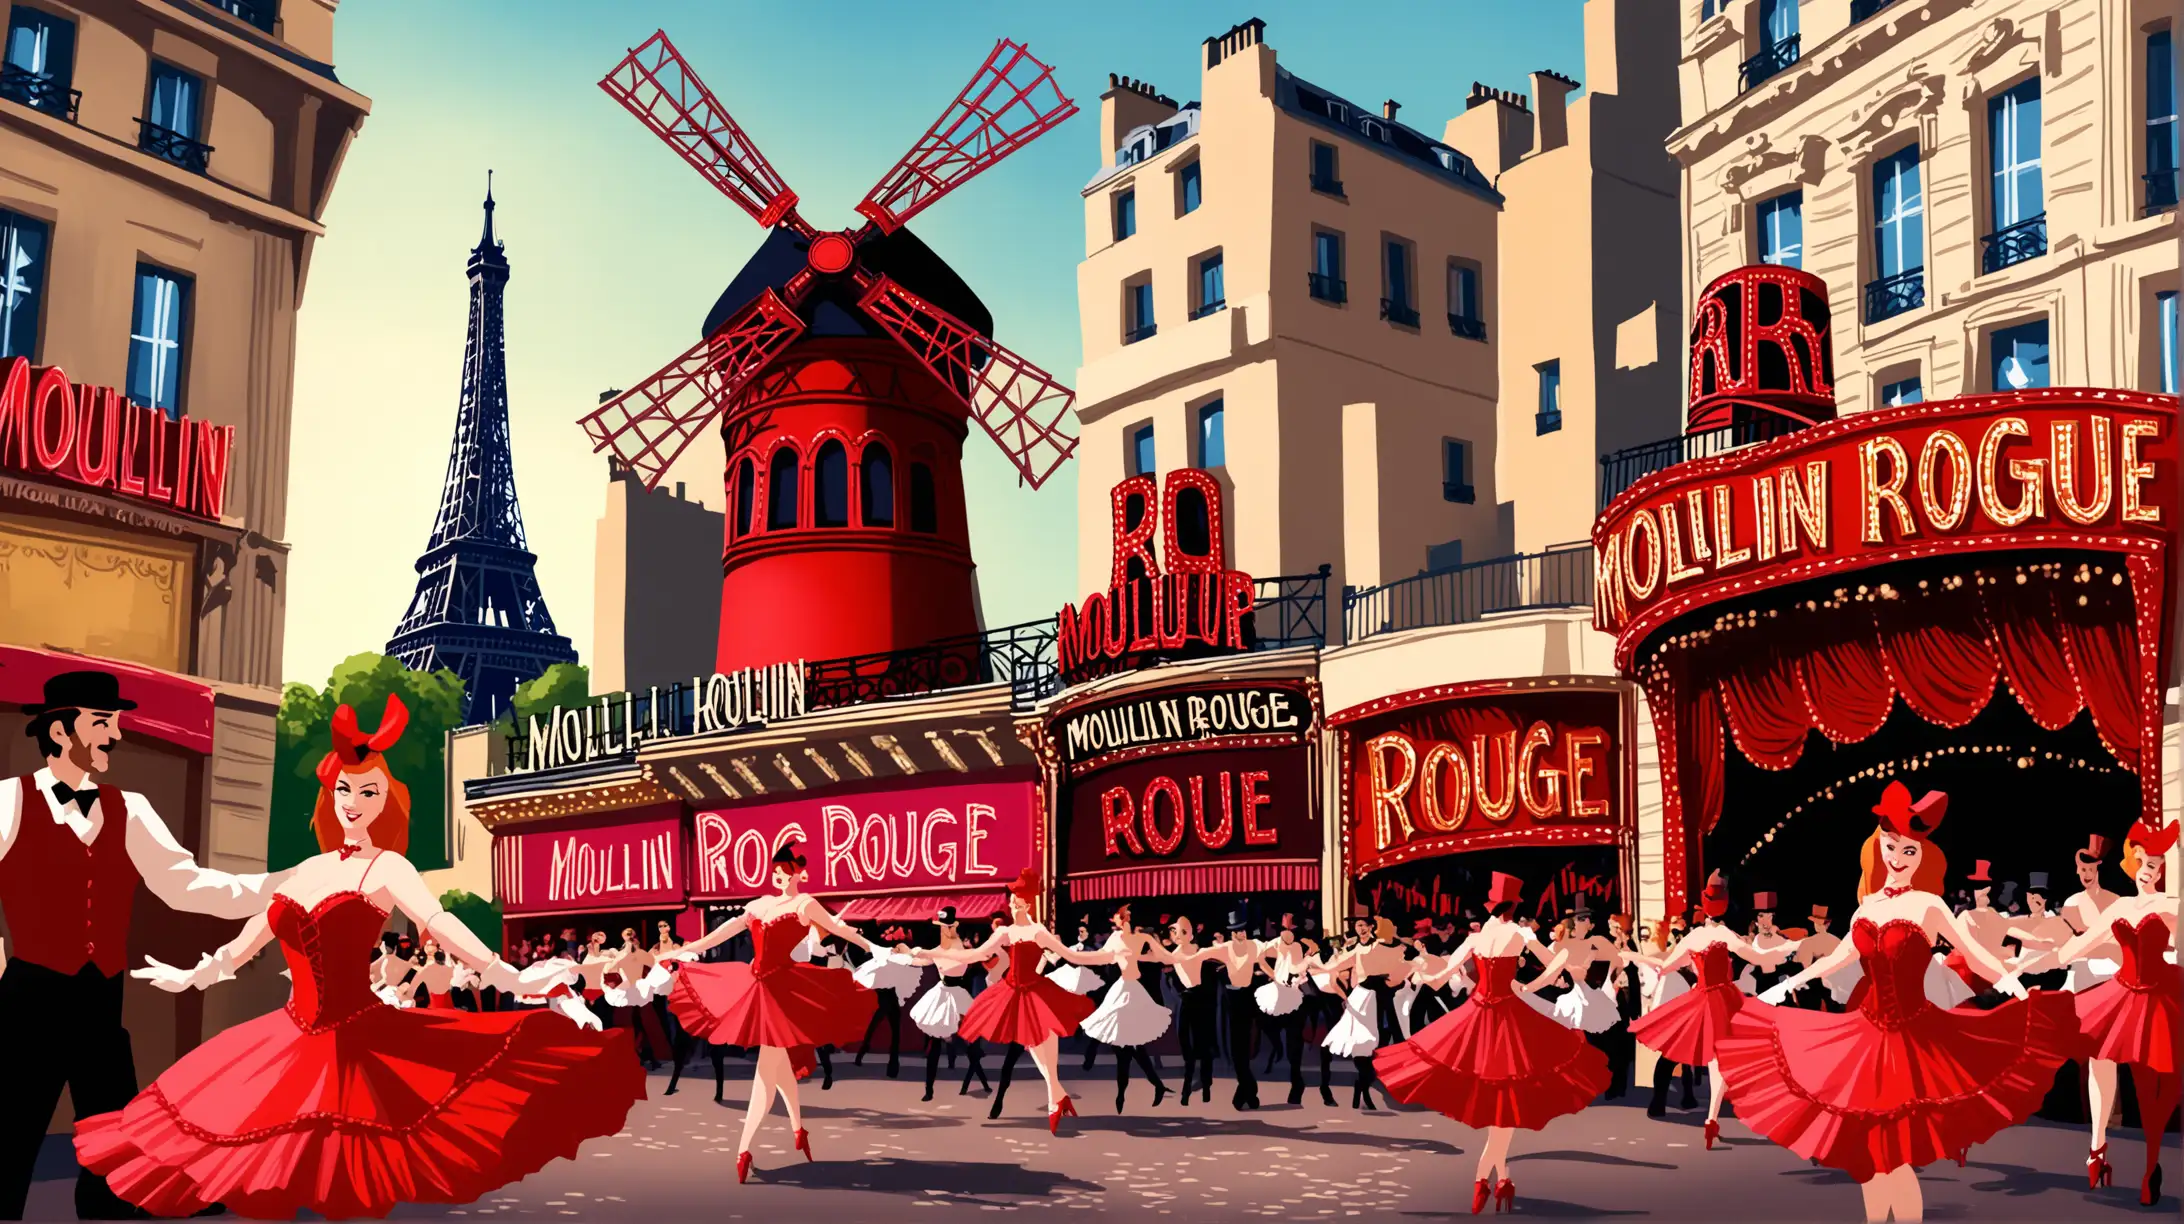 moulin rouge, Eiffel tower in the background, red-traditional windmill and can can dancers